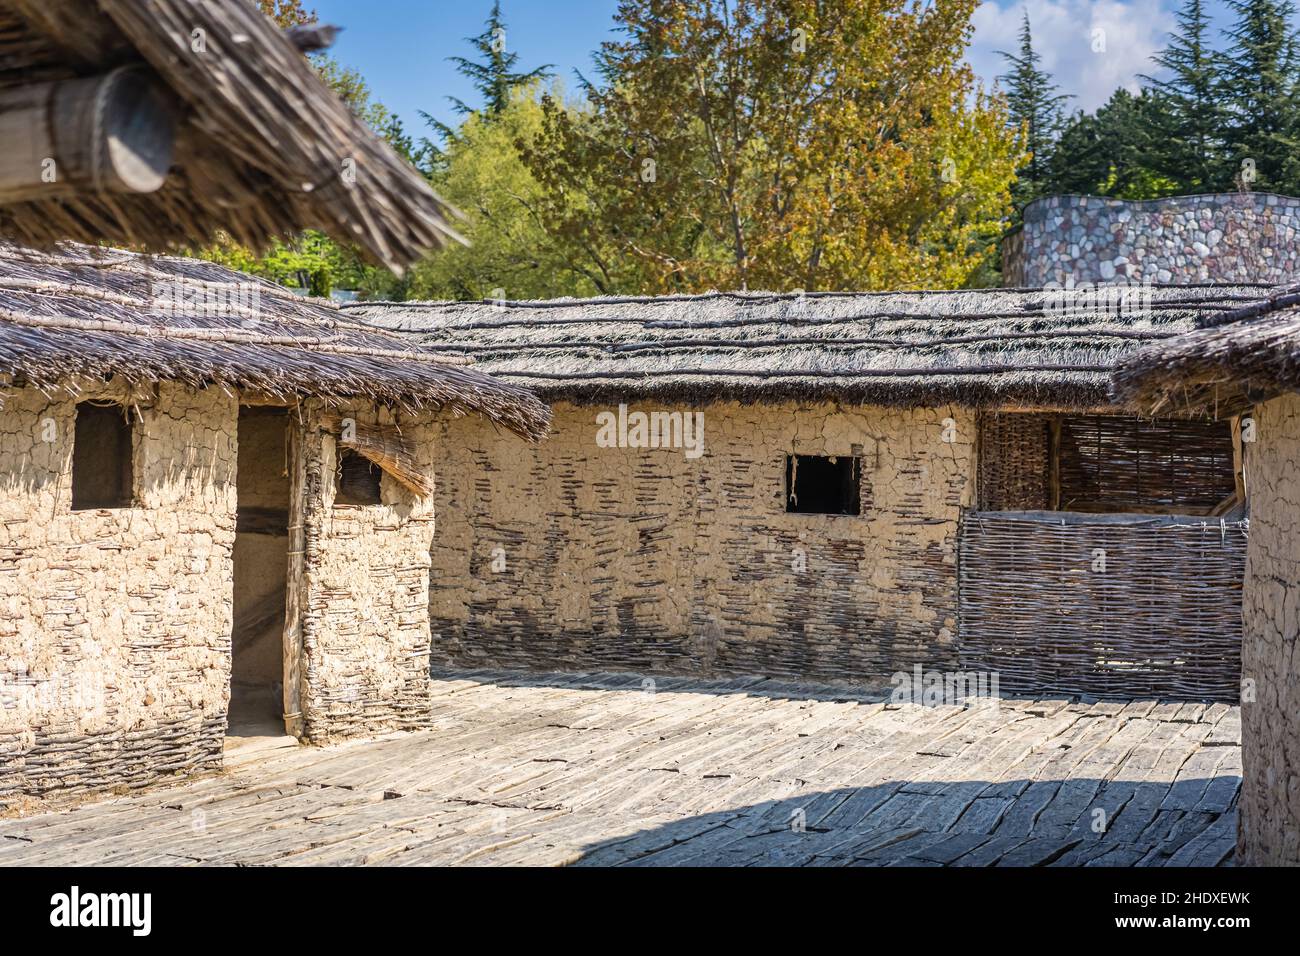 loam house, thatched roof, loam houses, roof, thatched roofs Stock Photo